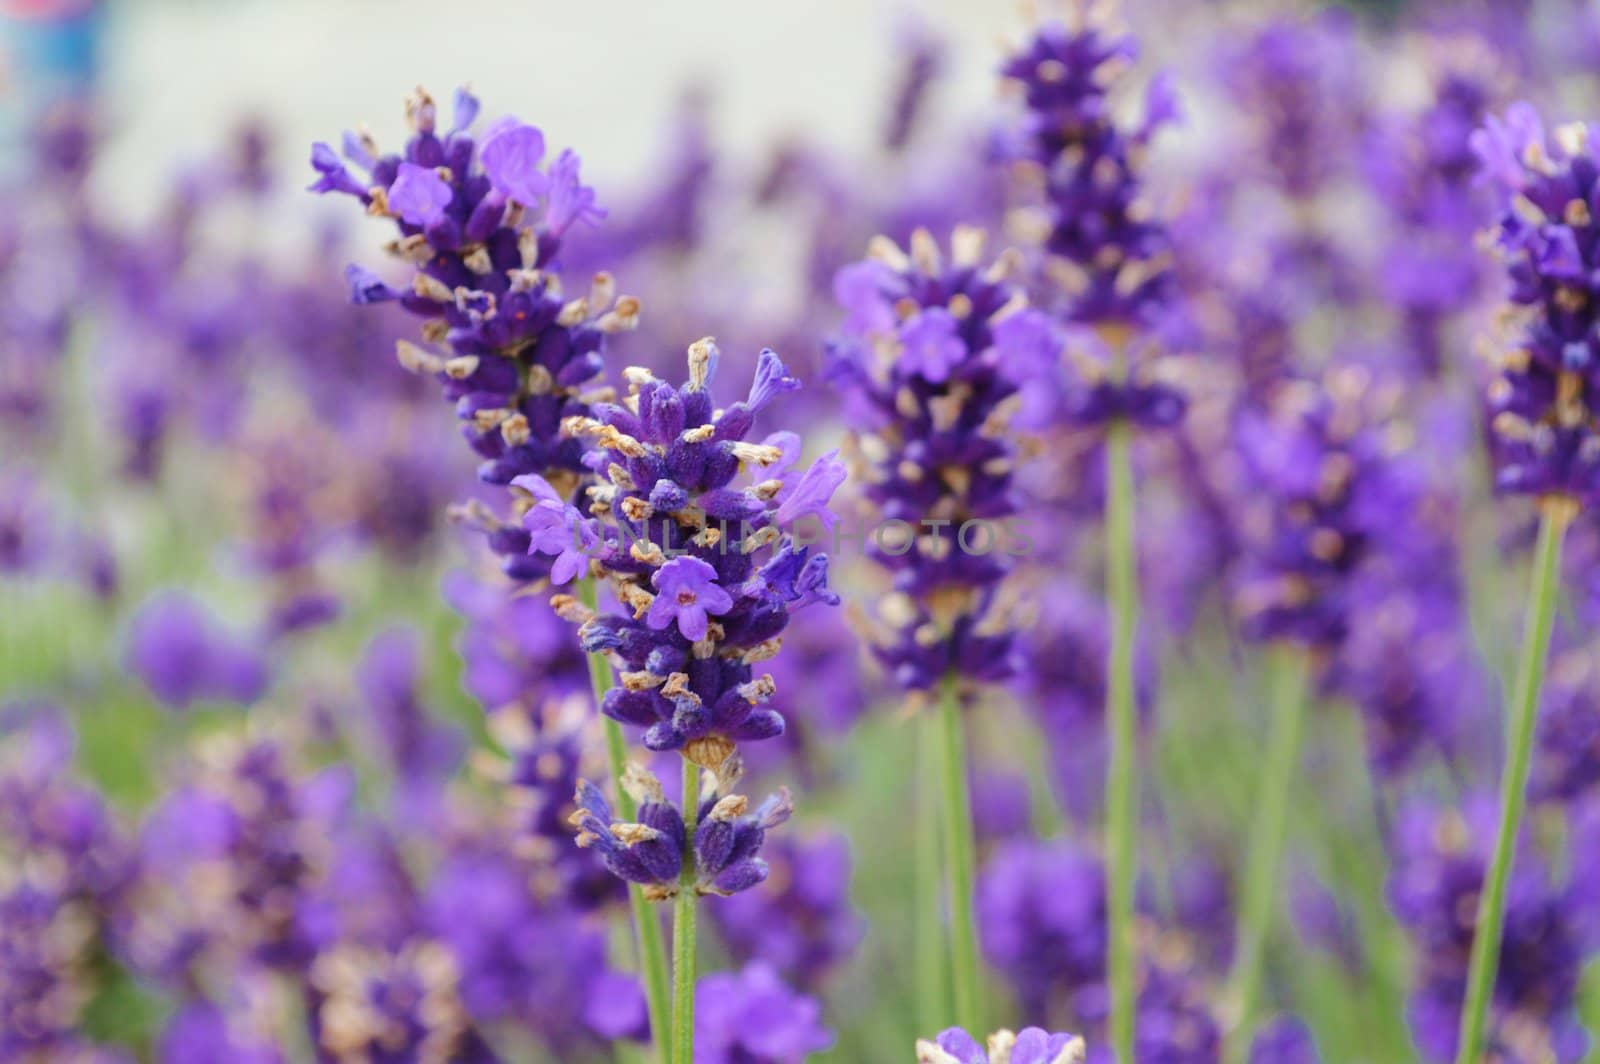 A close-up image of colourful Lavender flowers.